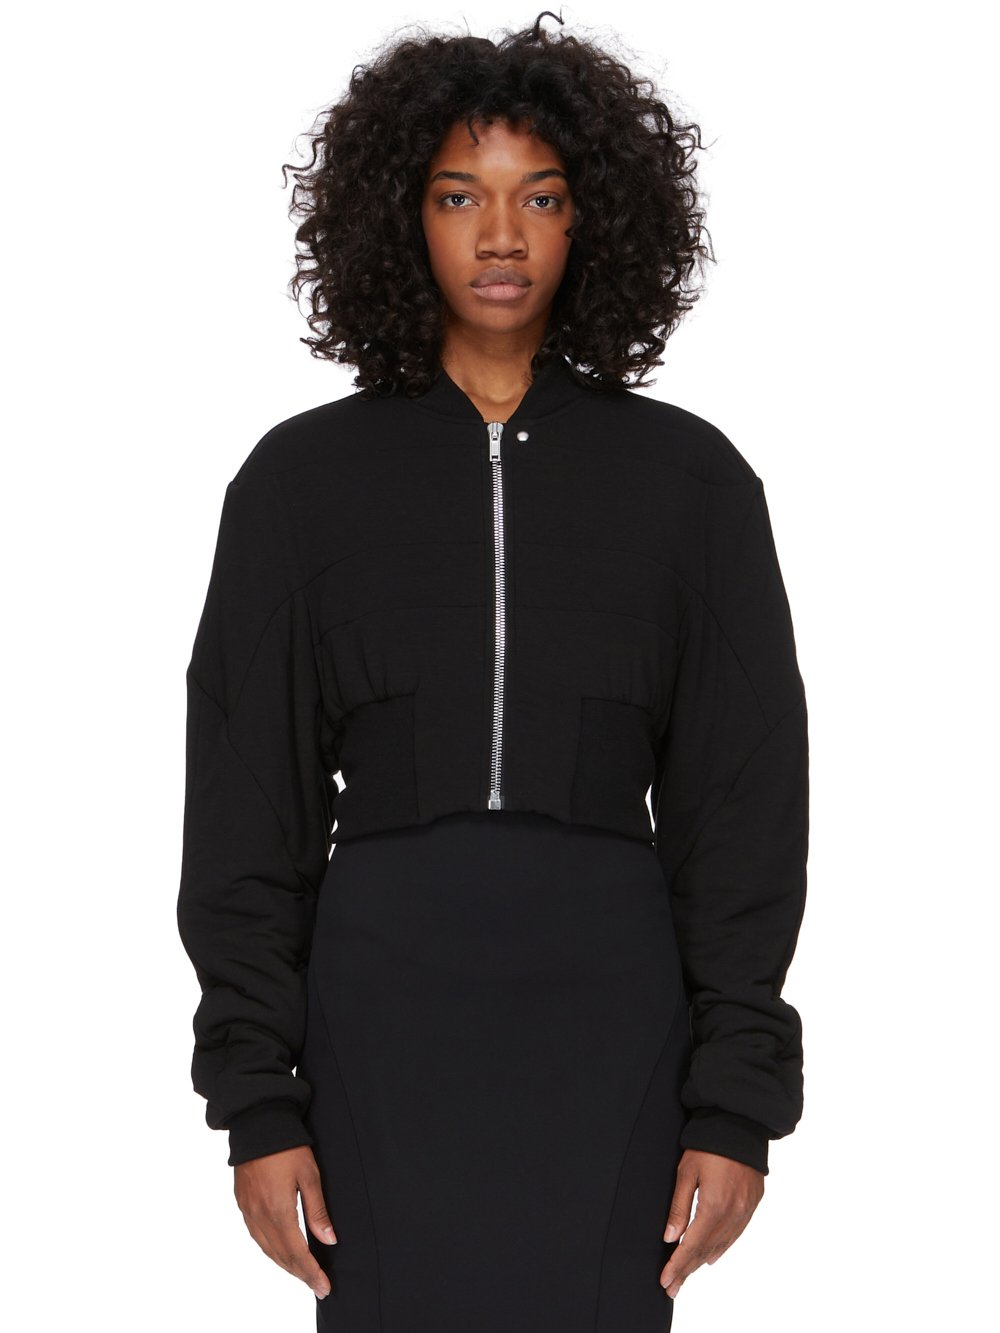 RICK OWENS LILIES FW23 LUXOR COLLAGE BOMBER IN BLACK MODAL CASHMERE JERSEY